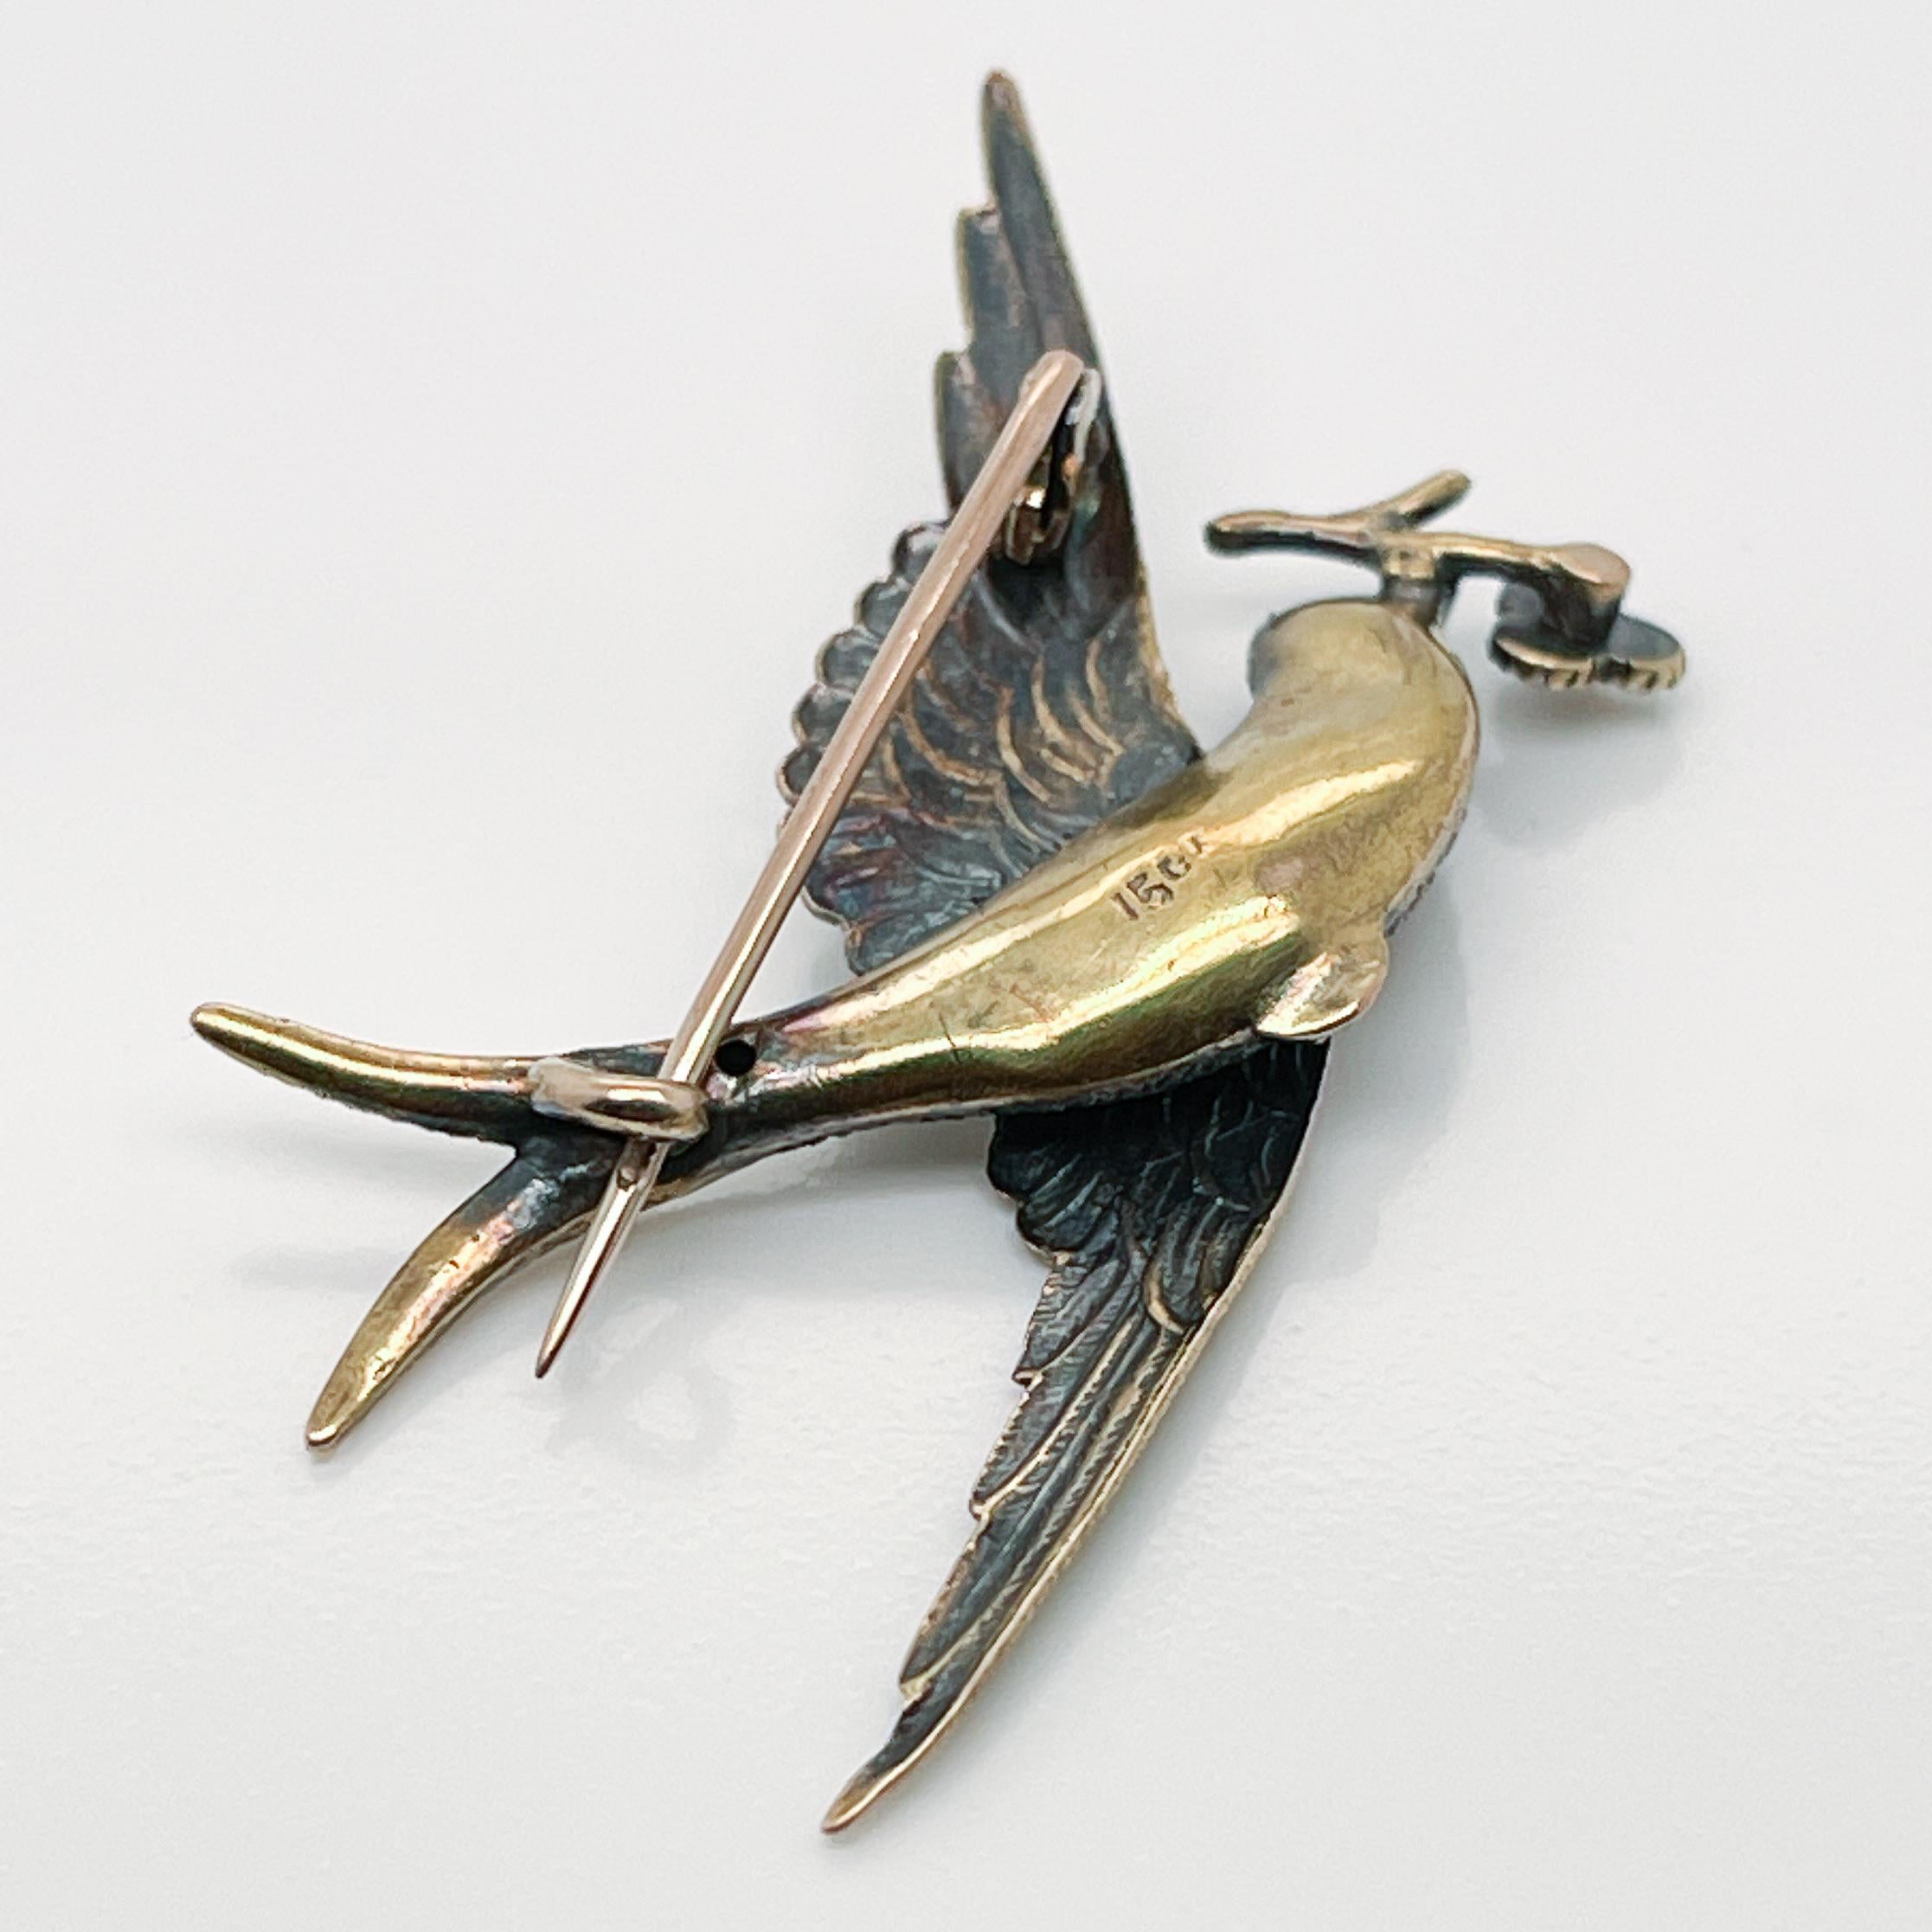 Edwardian Antique 15ct Gold & Seed Pearl Brooch of a Split Tail Swallow Bird with a Branch For Sale